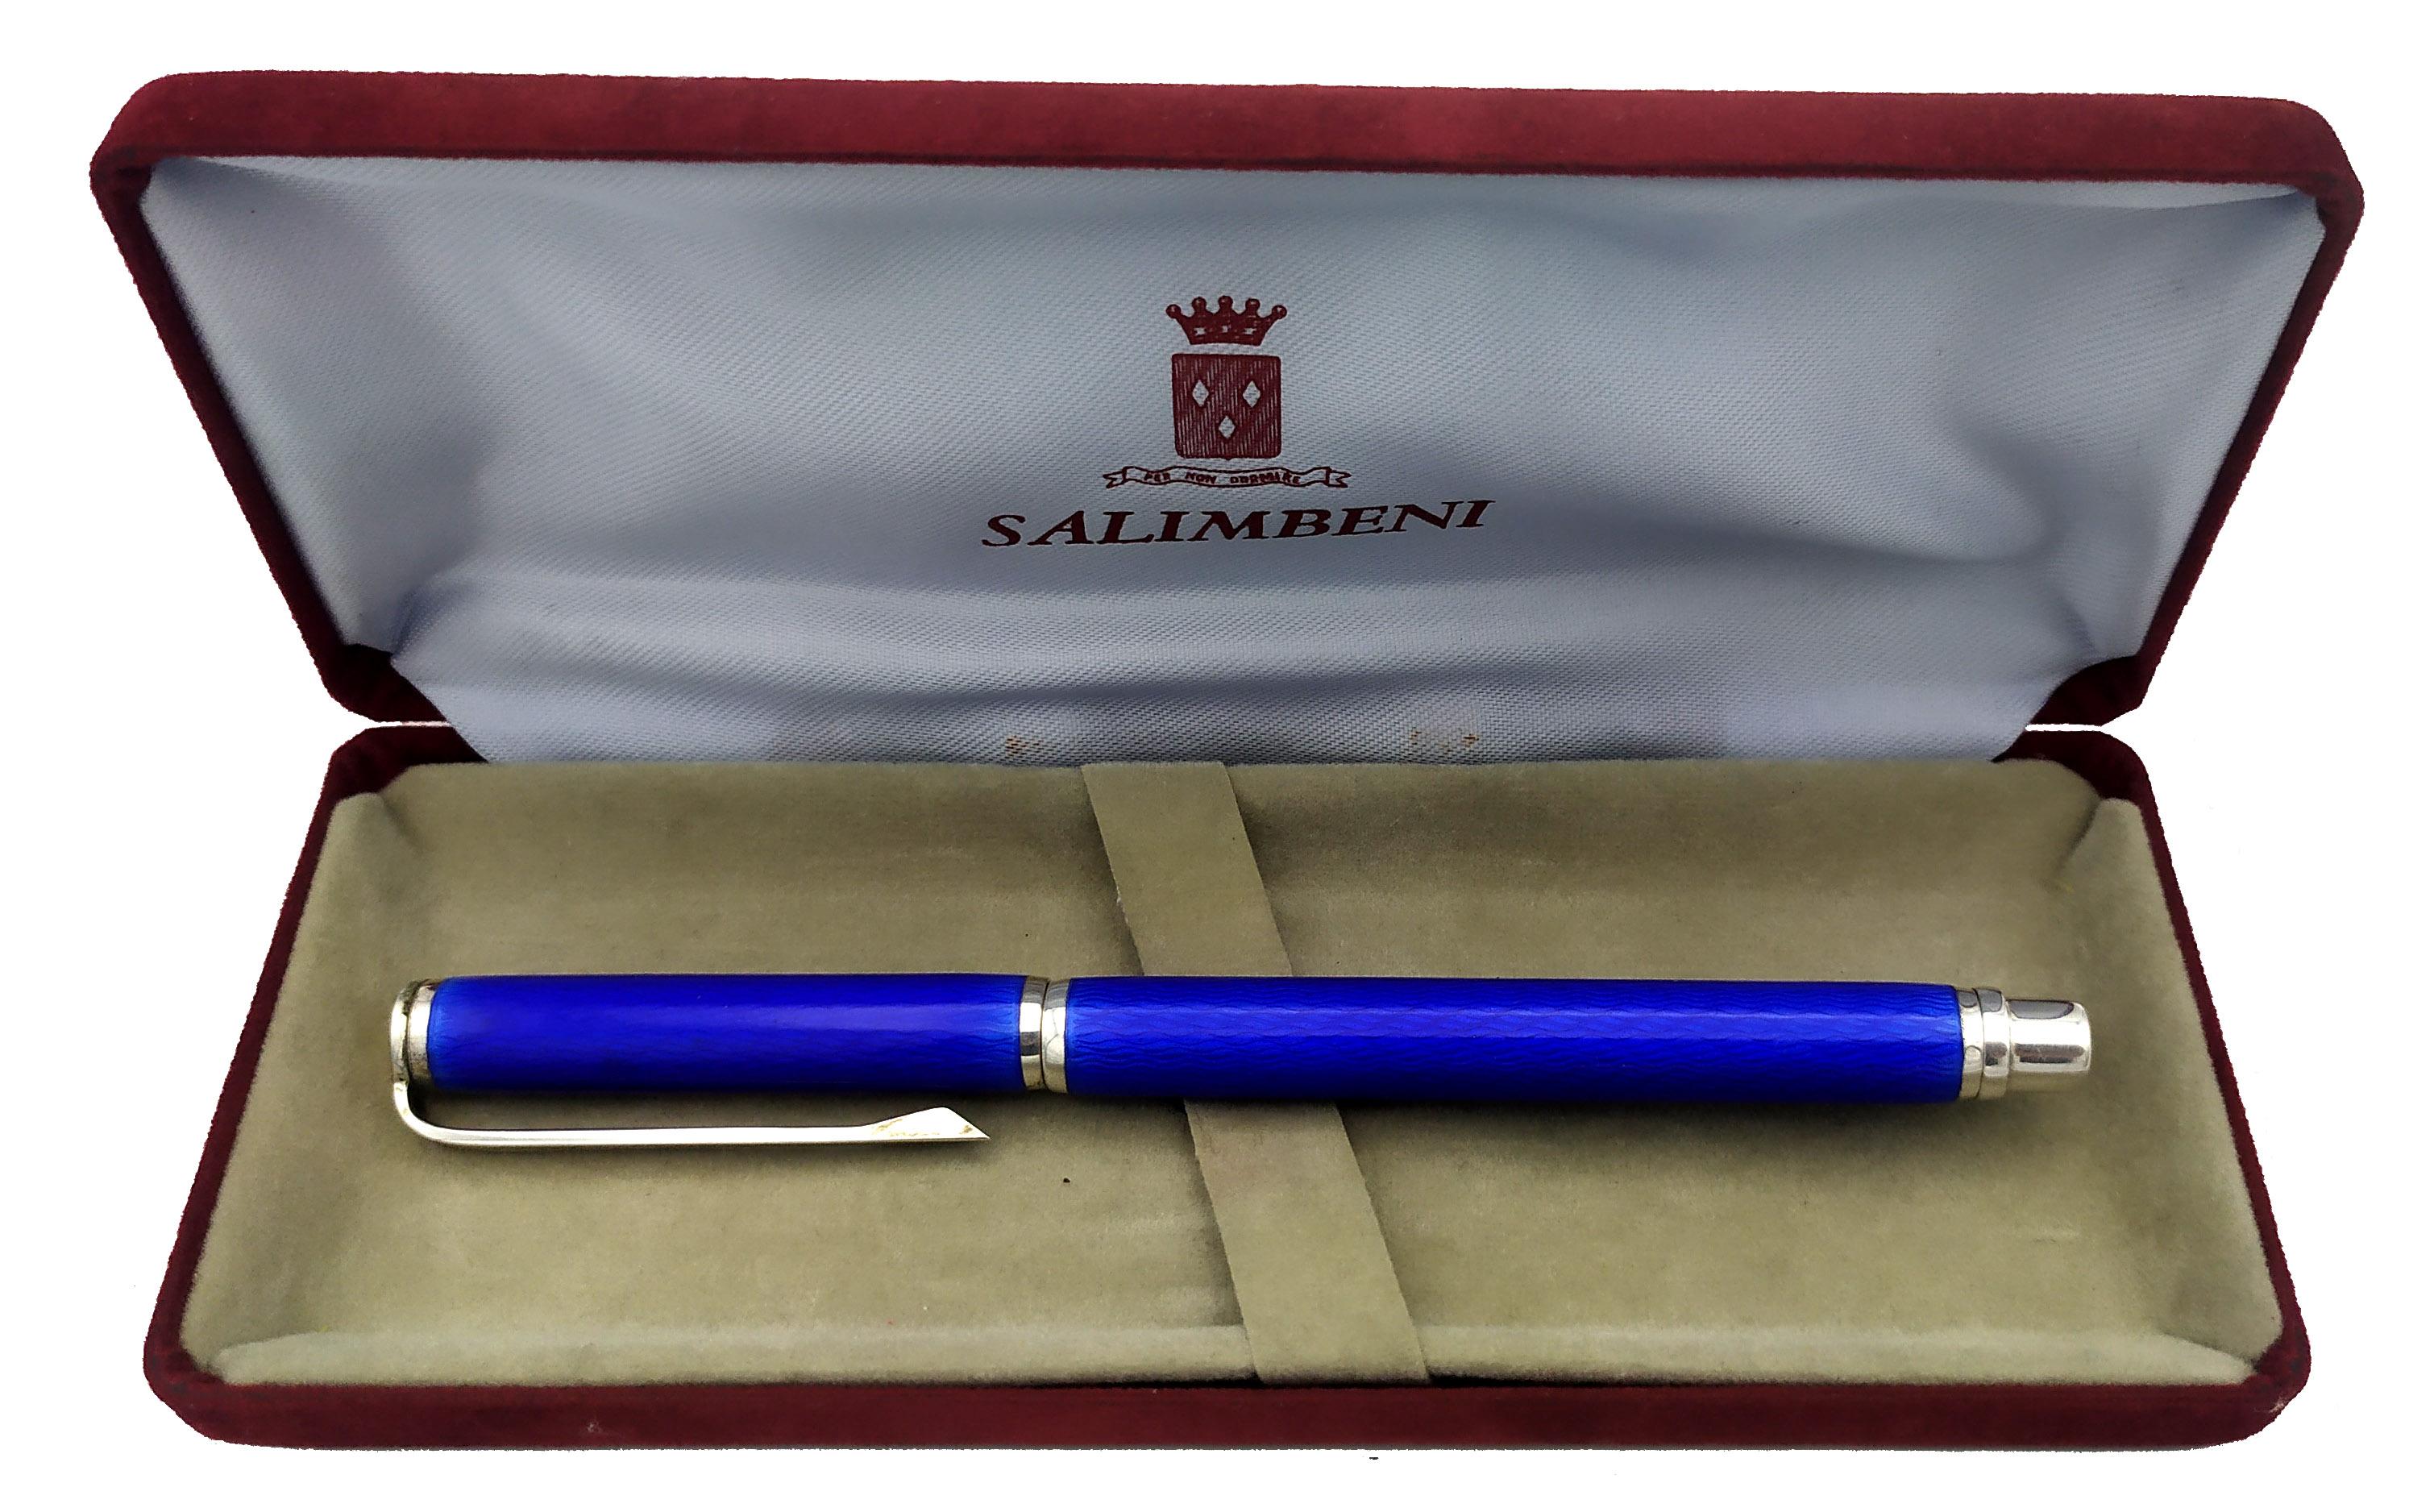 Fountain pen in 925/1000 sterling silver with translucent fired enamel on guilloche. With 14 carats gold nib and ink cartridge. Diameter mm. 10.5 Total length cm. 14. Weight gr. 45. Designed by Giorgio Salimbeni in 1974 and produced in numerous